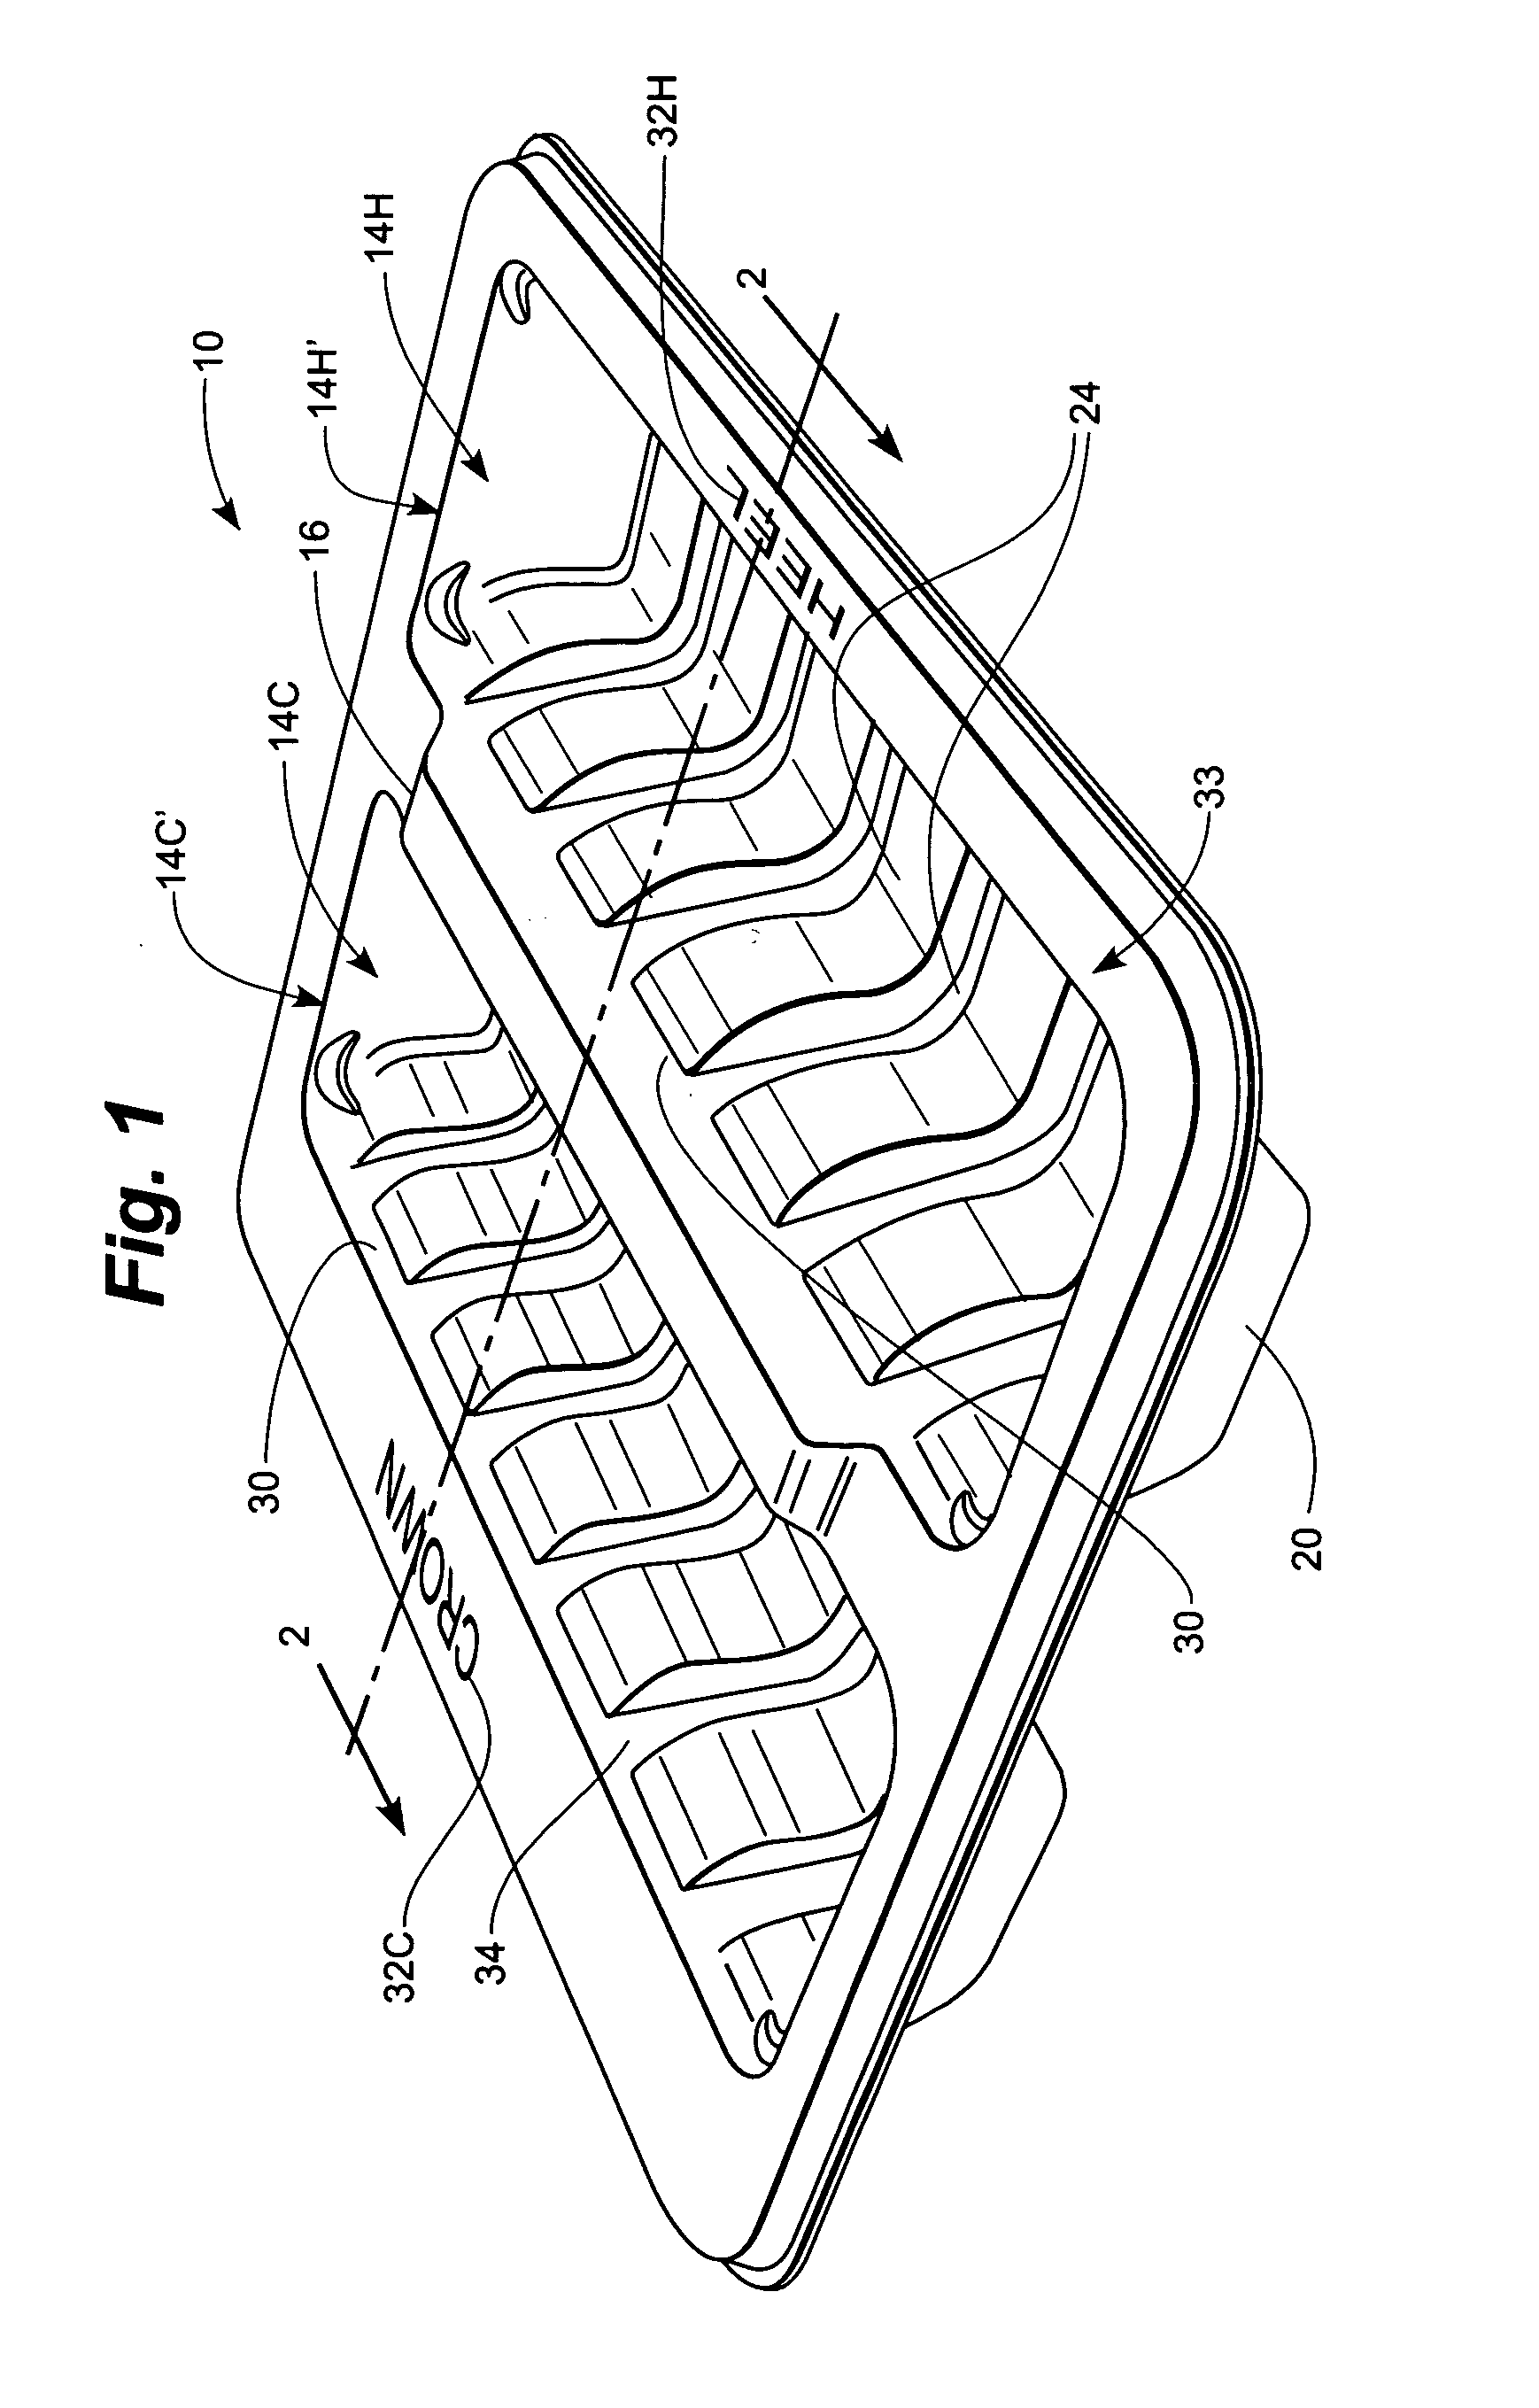 Method and apparatus for making a sandwich